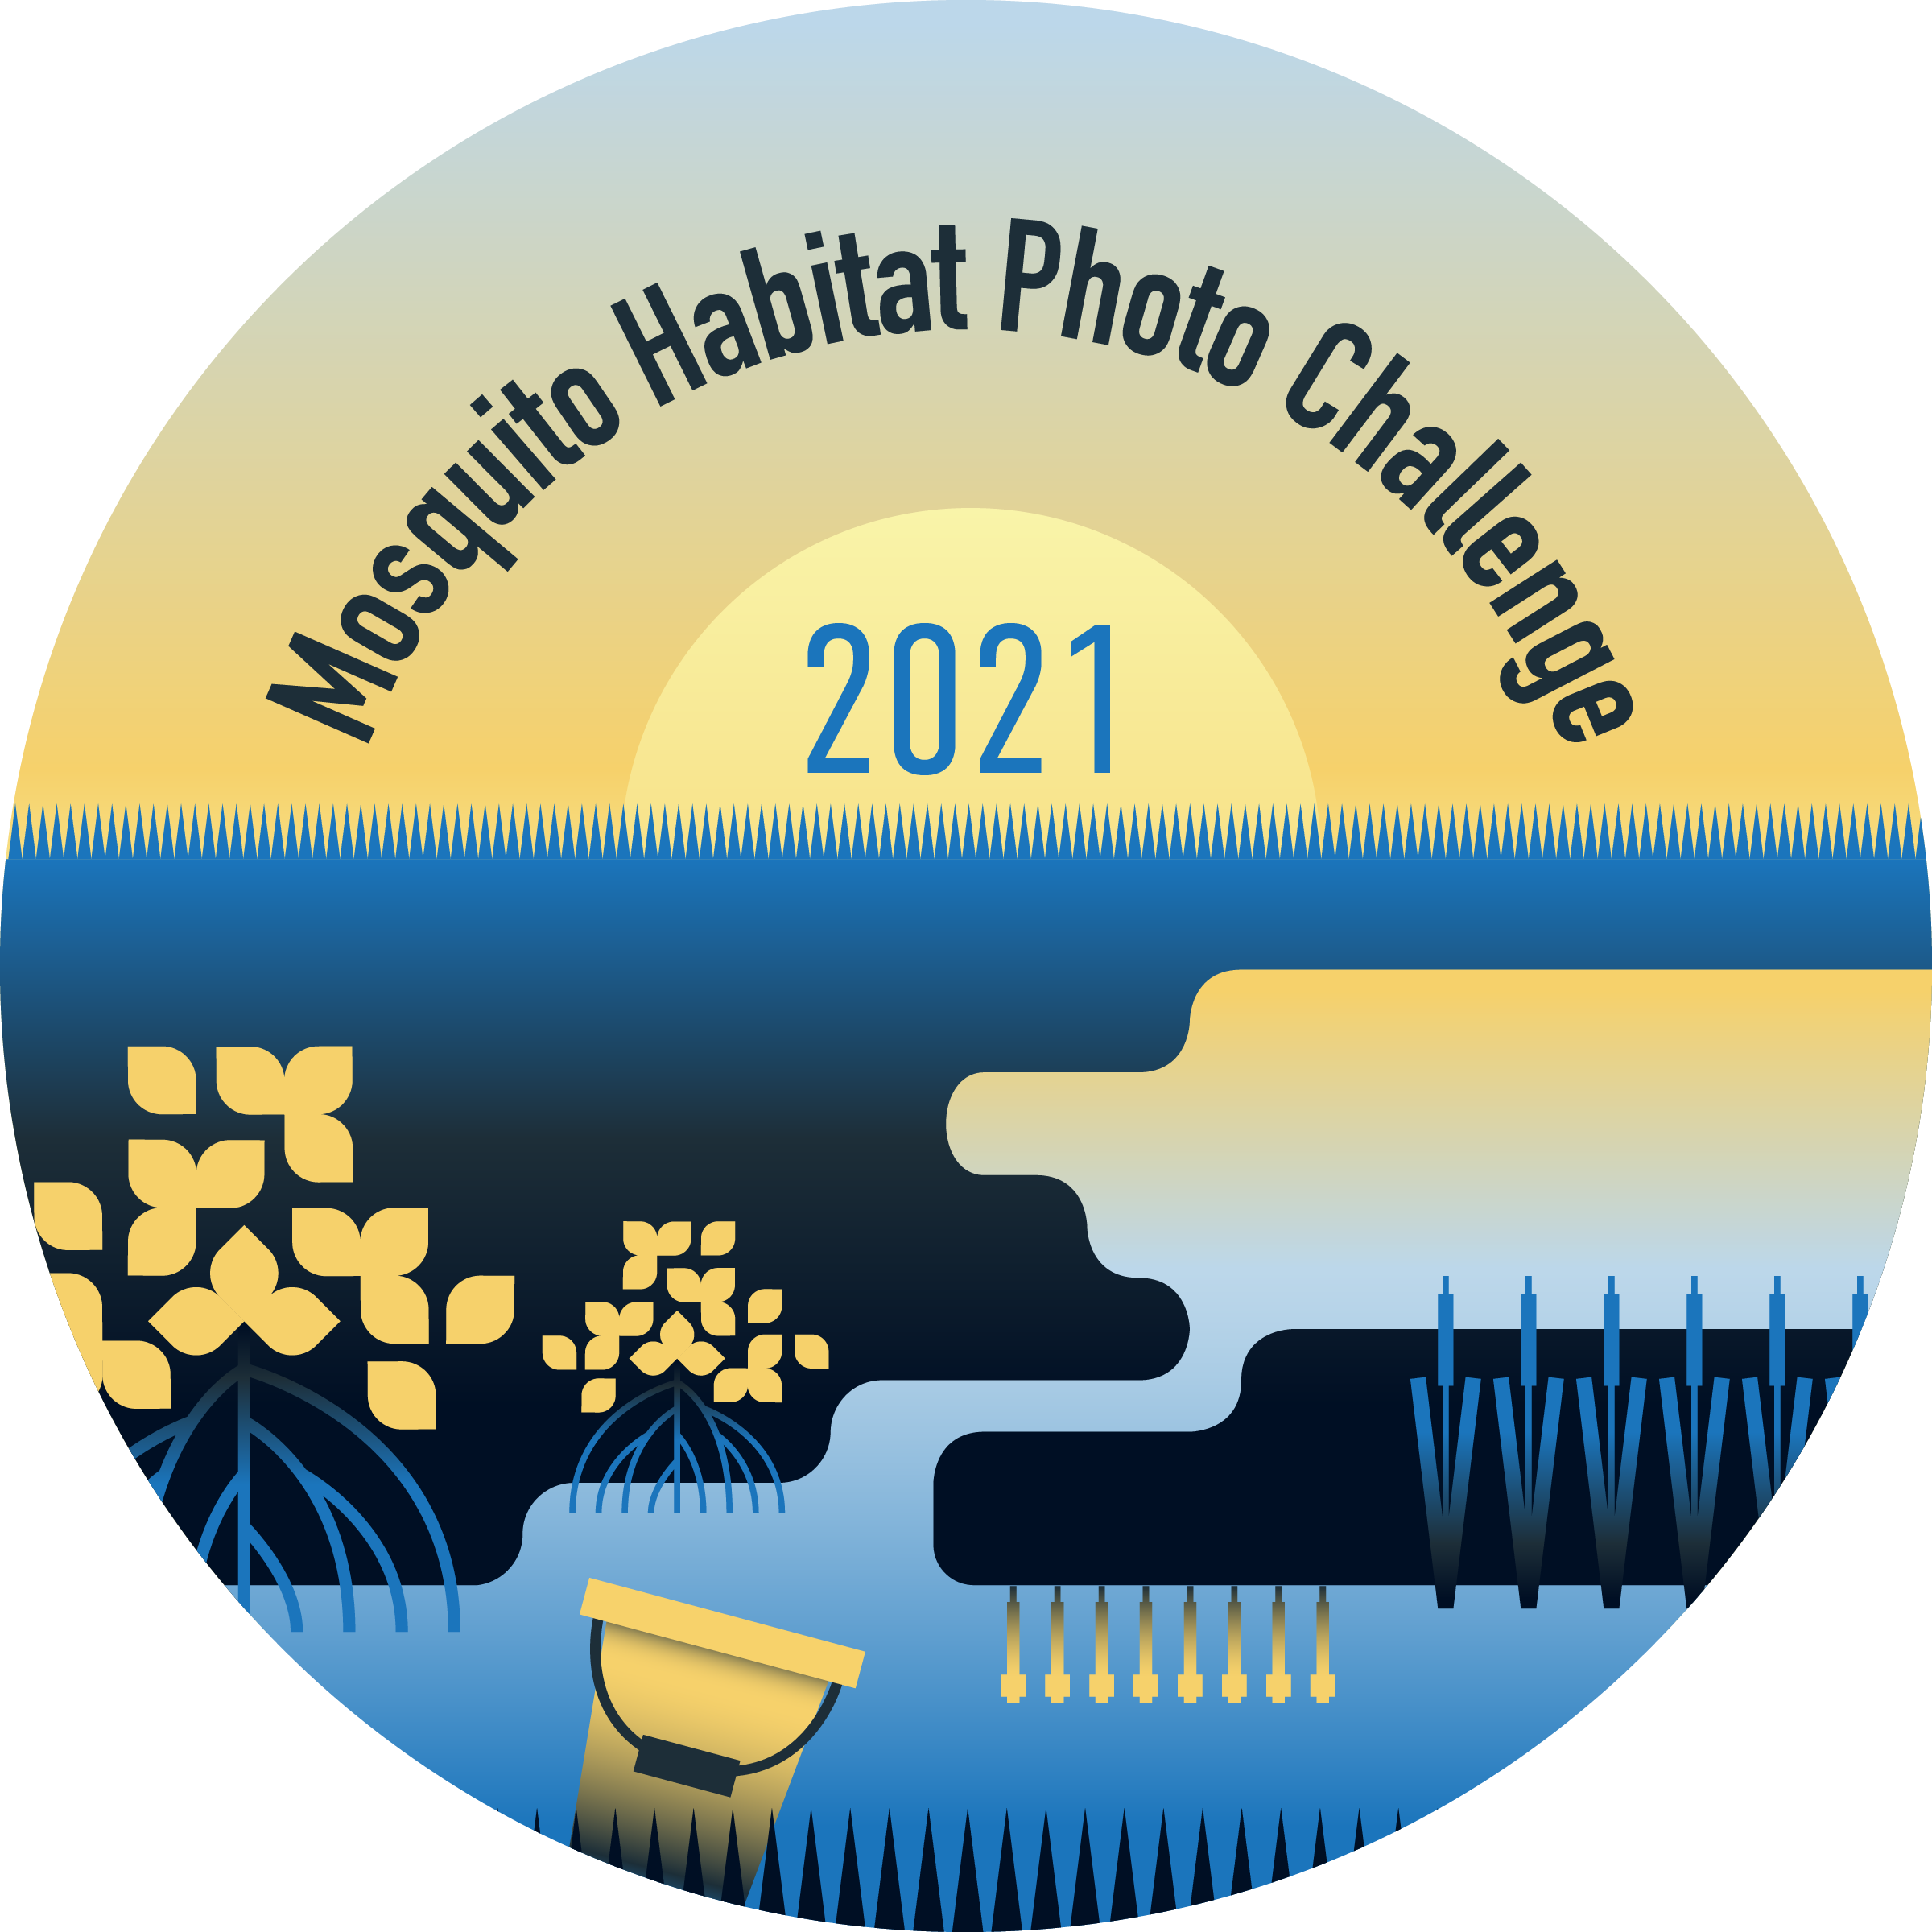 2021 Mosquito Habitat Photo Challenge shareable, showing a lake, grasses, plants, and the Sun